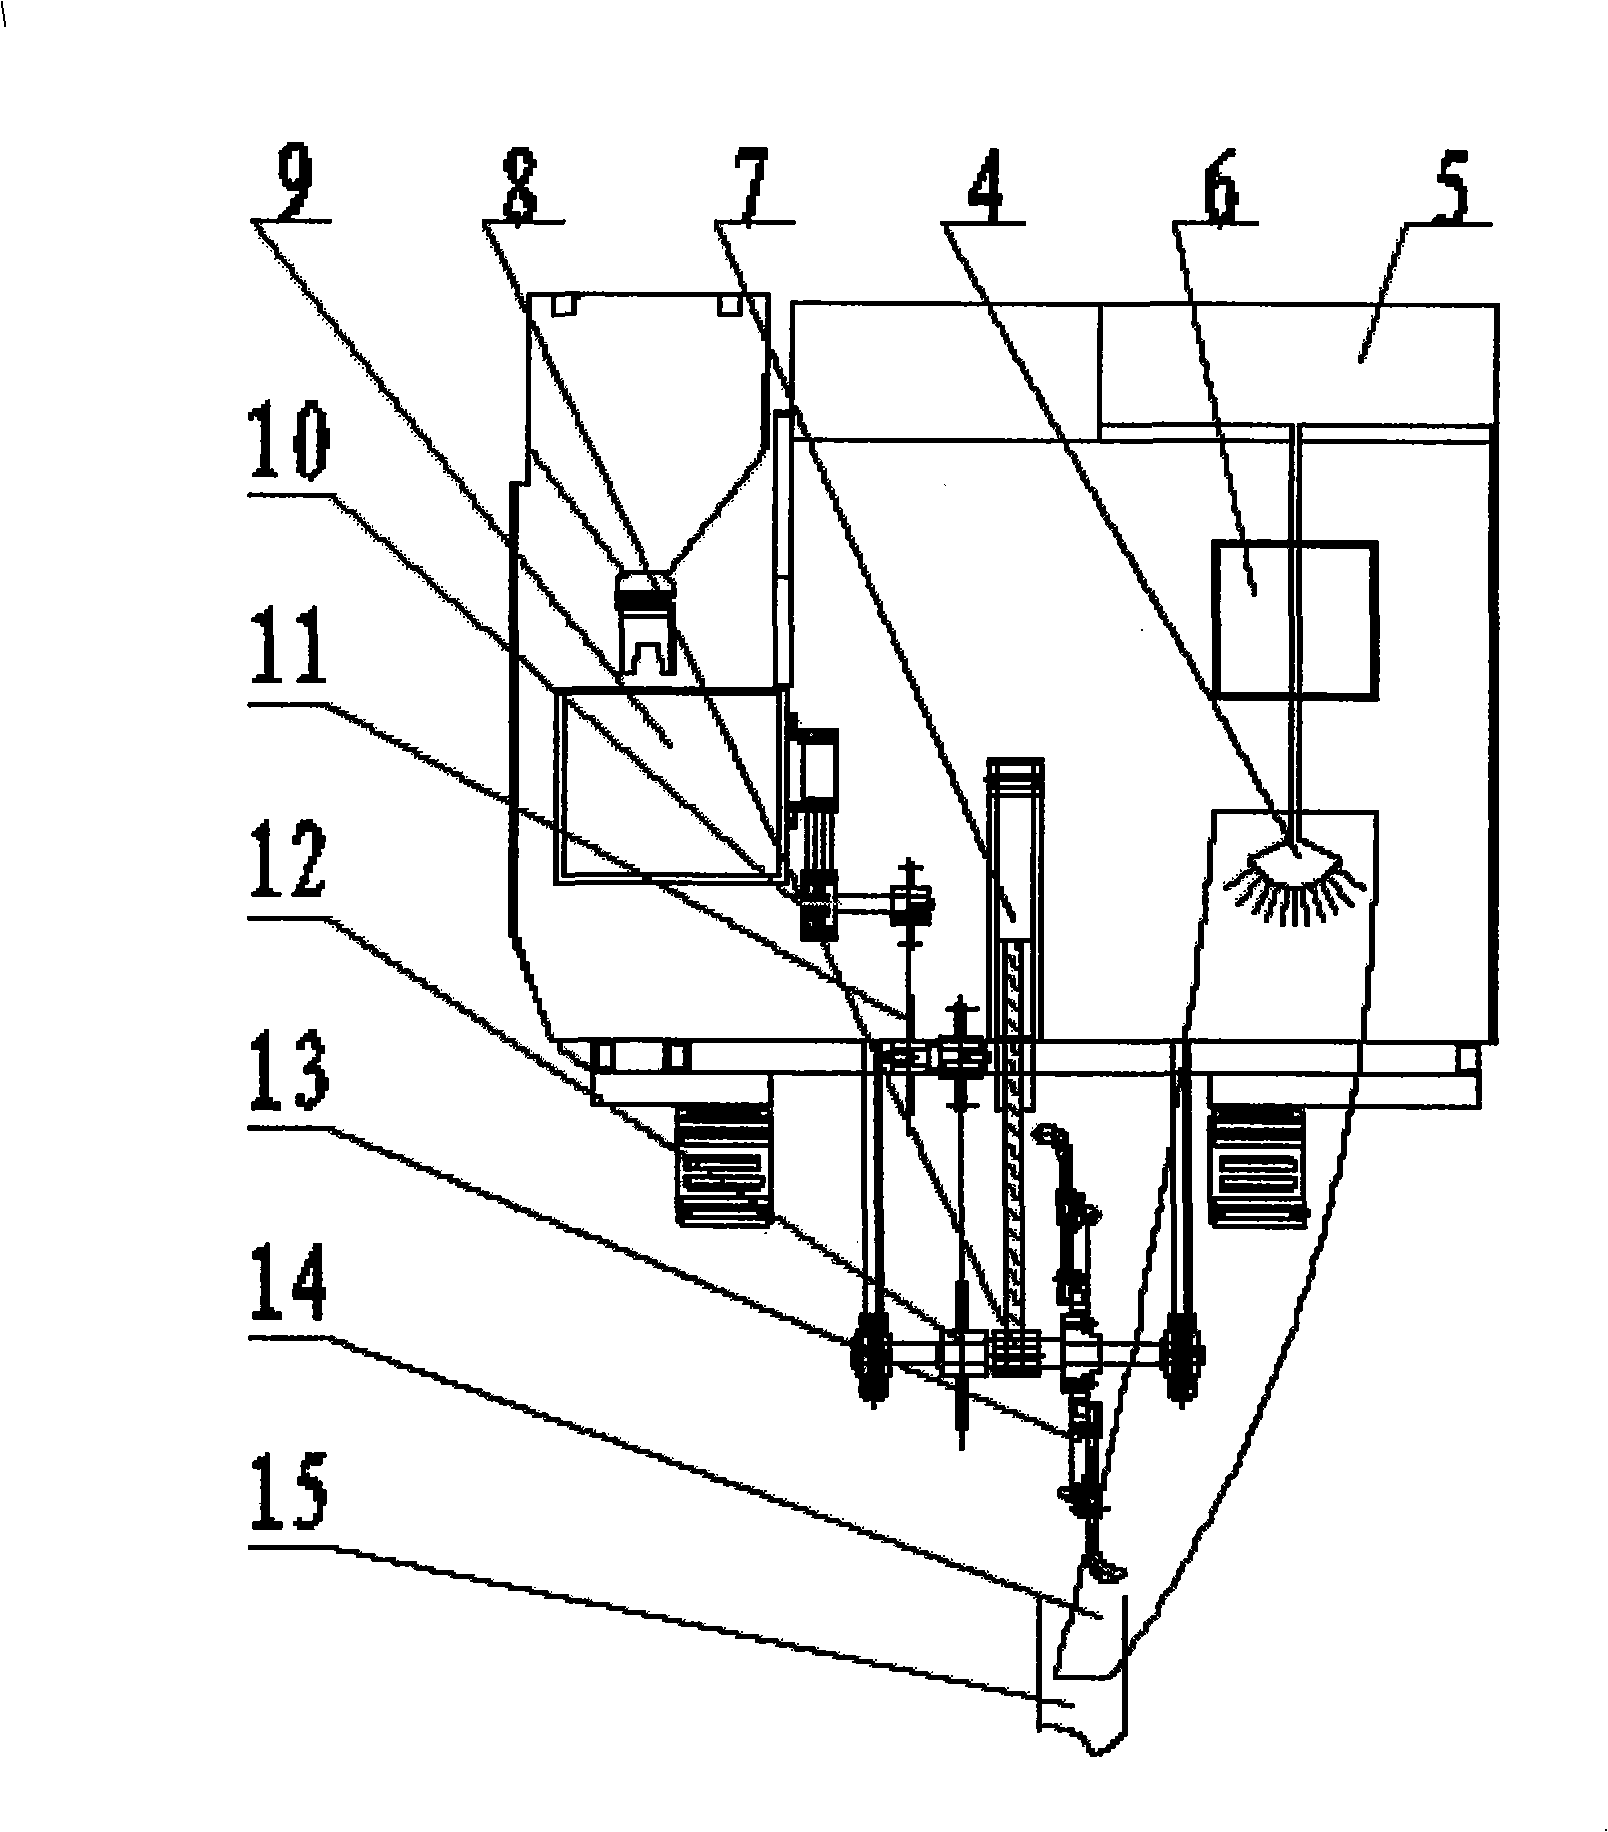 Rice-wheat combined multifunctional one-piece device of harvesting, ditching, covering grass and spraying